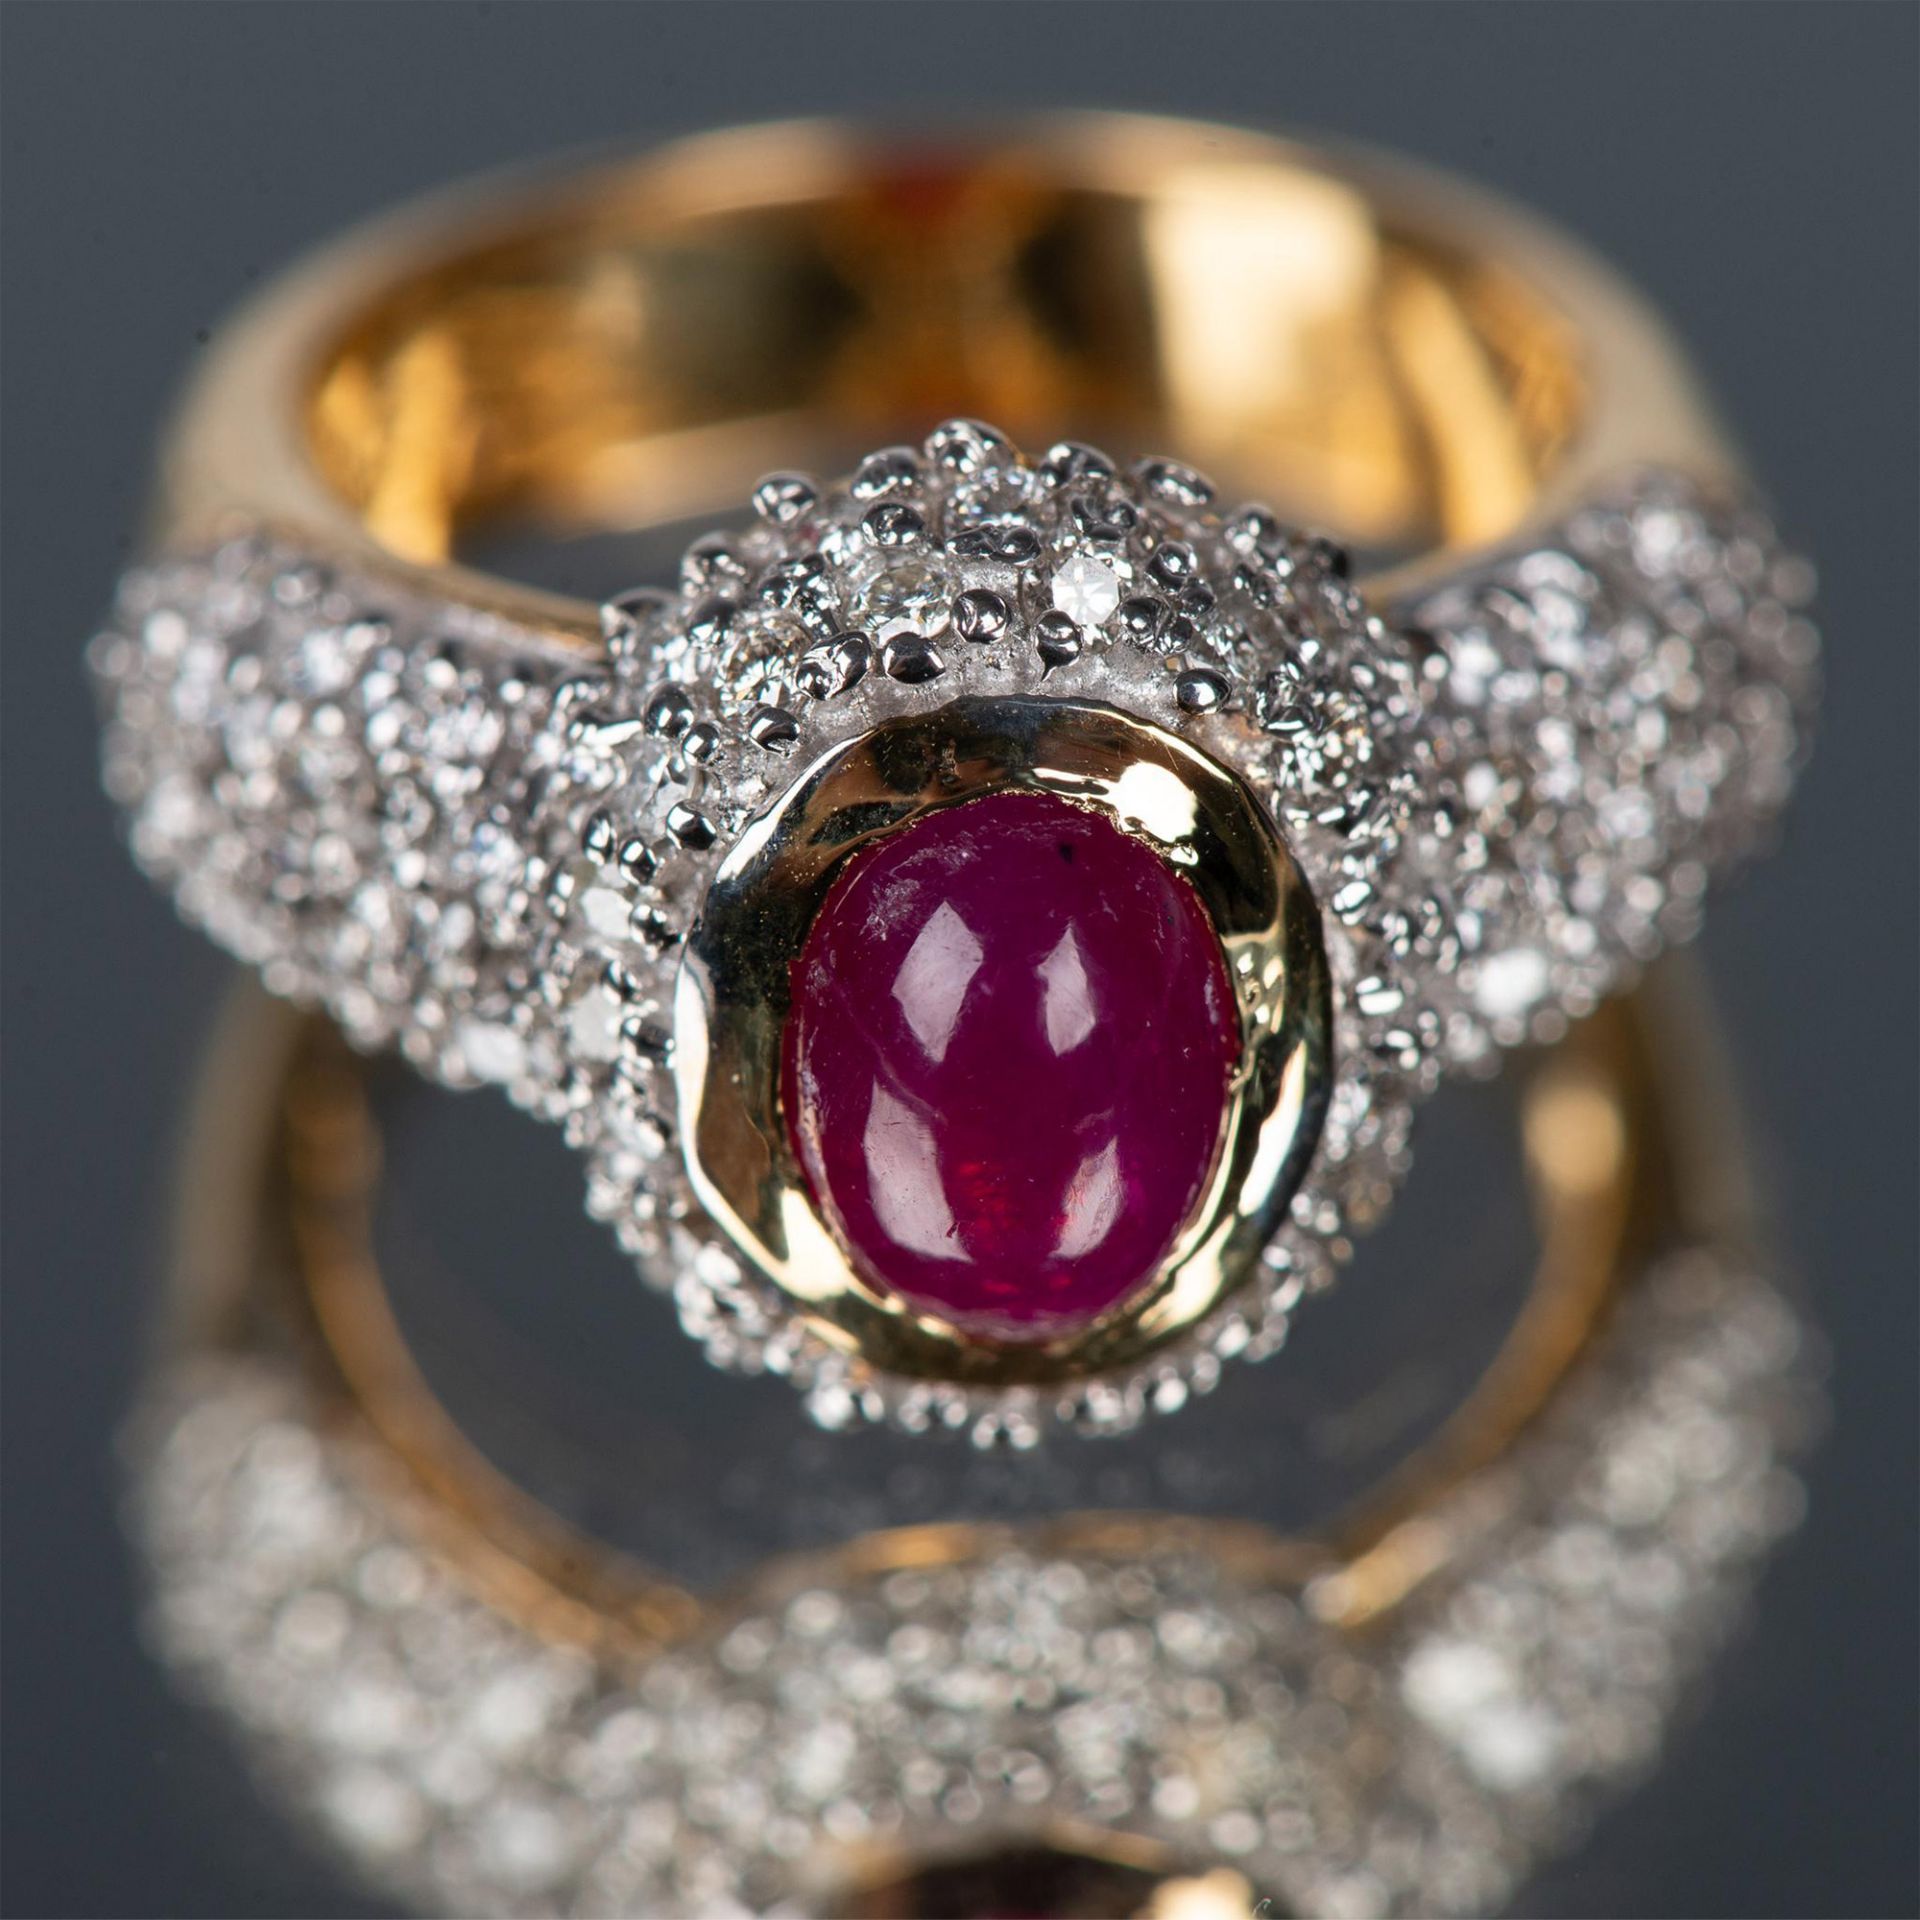 Fabulous 14K Yellow Gold, Diamond, and Ruby 2.9ctw Ring - Image 11 of 11